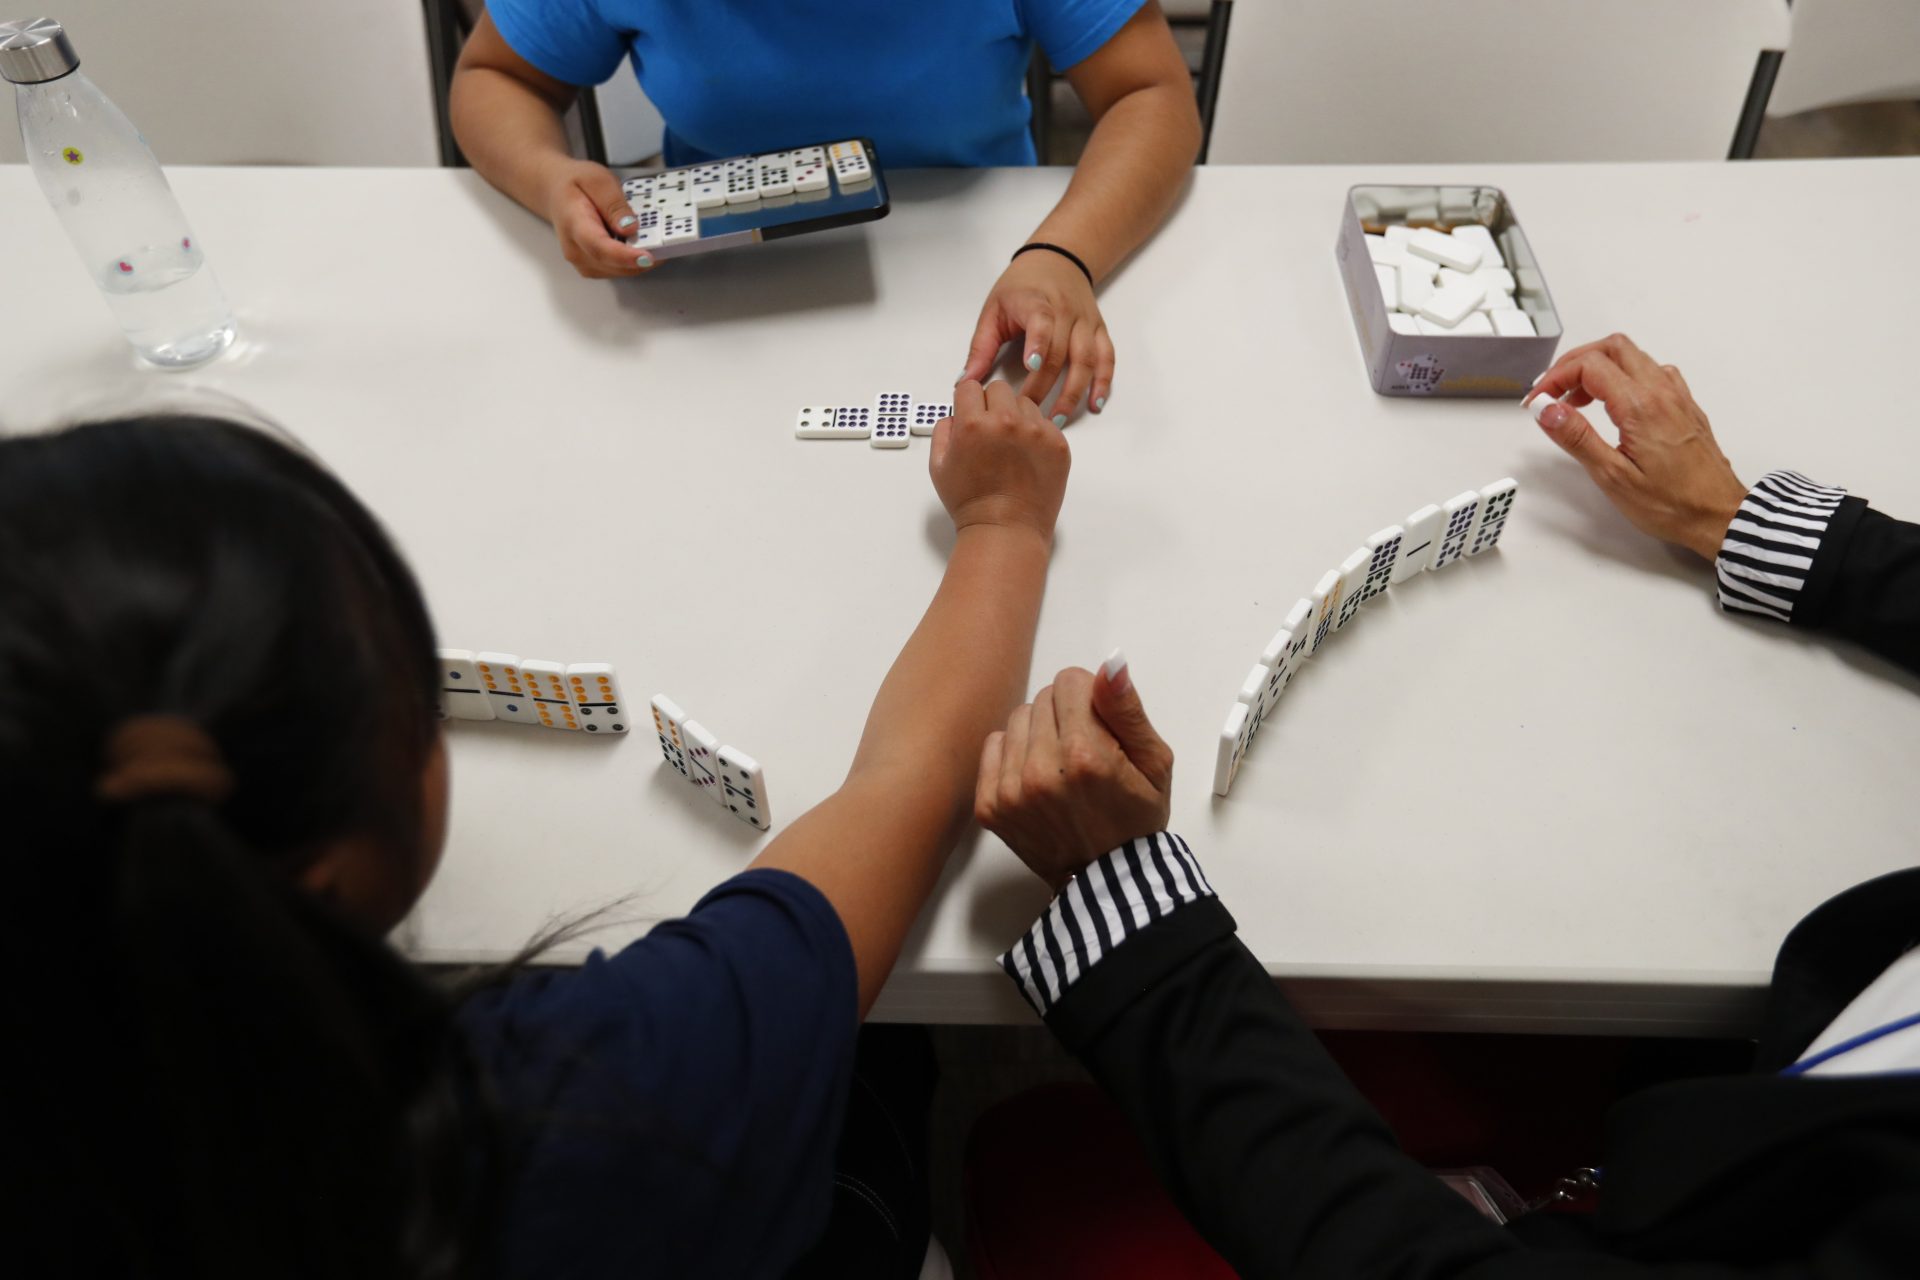 In this Sept. 24, 2019, photo, girls play dominos with a staff member at a shelter for migrant teenage girls, in Lake Worth, Fla. The nonprofit U.S. Committee for Refugees and Immigrants opened the federally funded Rinconcito del Sol shelter this summer, aiming to make it a model of excellence in a system of 170 detention centers, residential shelters and foster programs which held nearly 70,000 migrant kids in the past year.